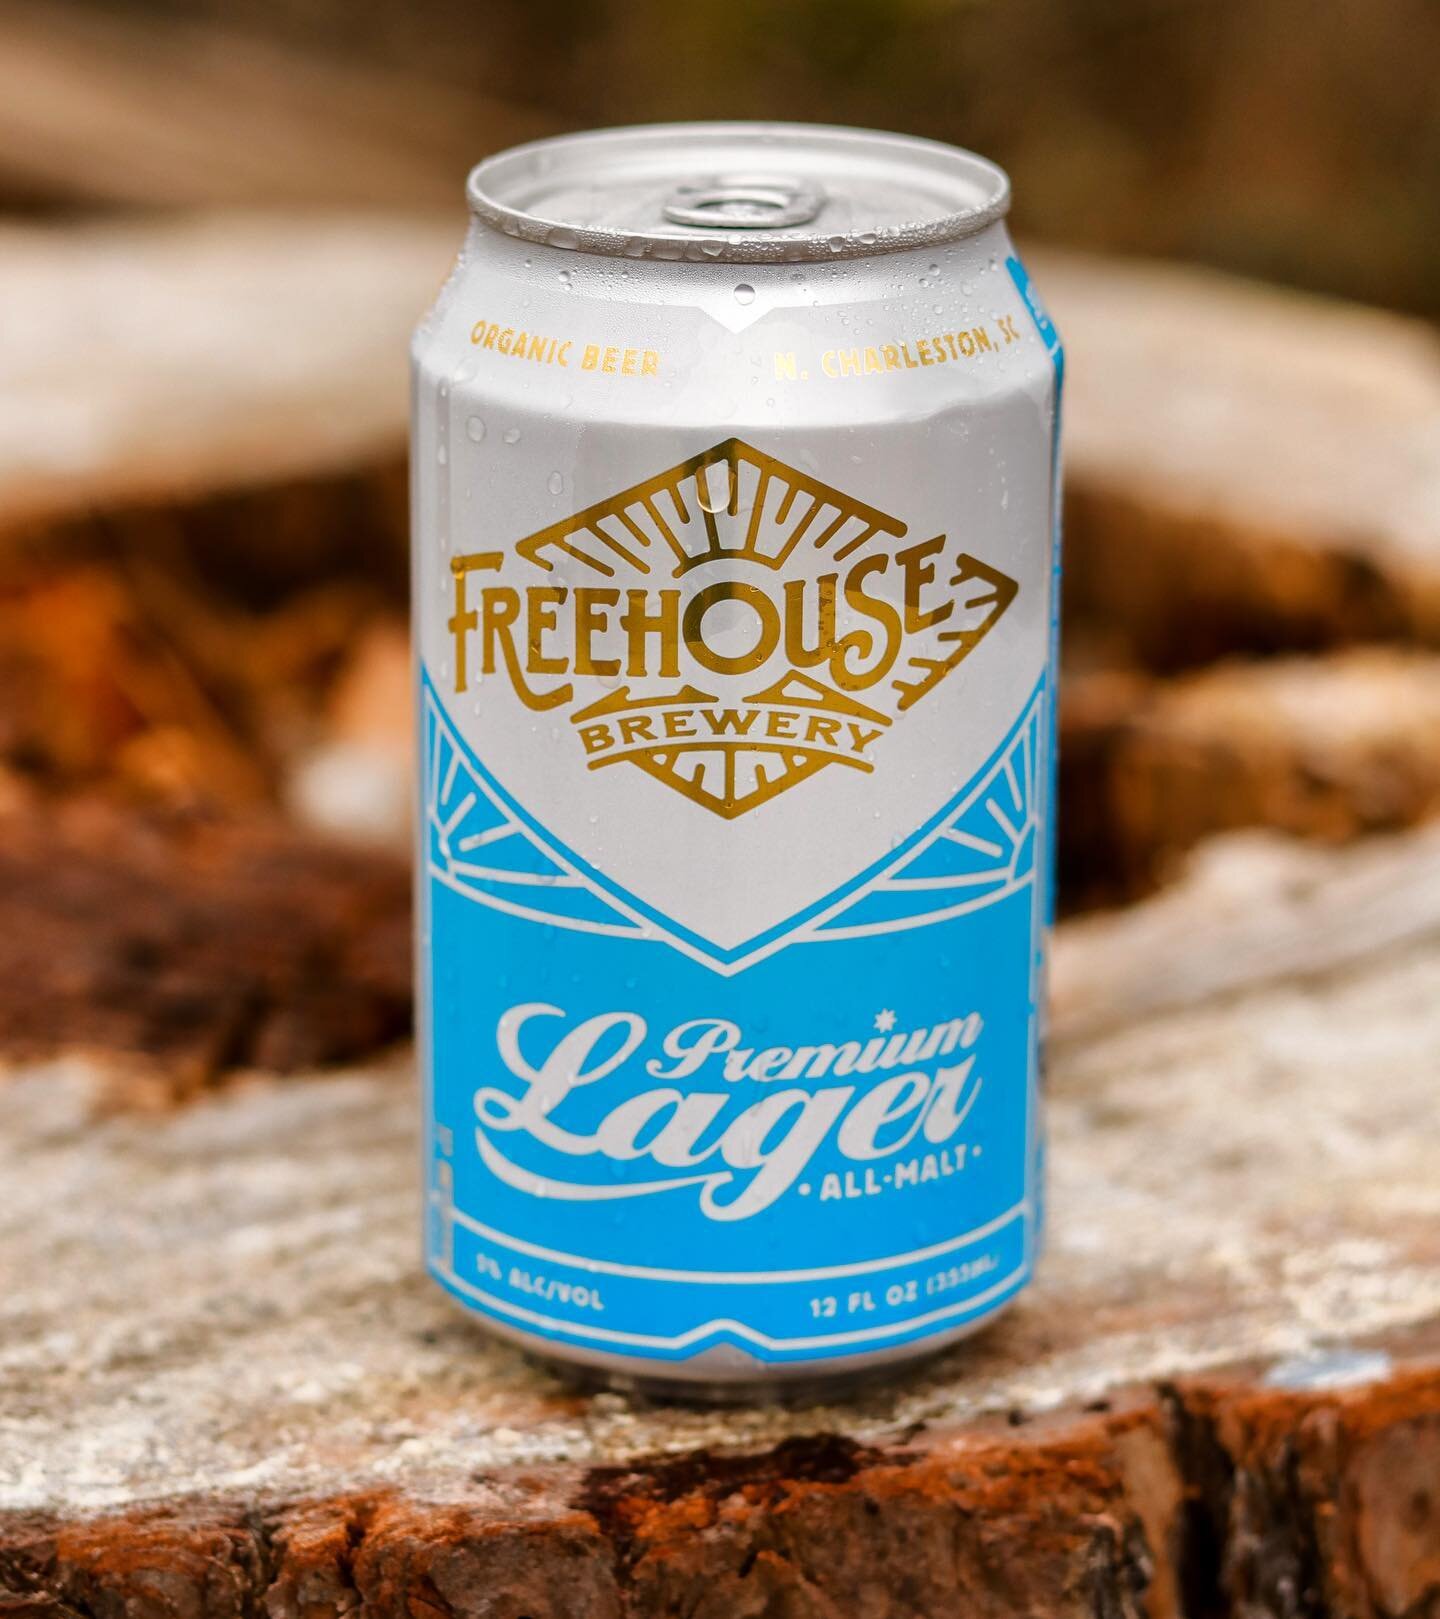 Fresh Premium Lager. 🙌
A pure and classic all-malt lager brewed in the German Helles style - Smooth and dry with a grainy sweetness in the finish. One of our Flagship favorites at 5% ABV. Grab a pint in the taproom or take a 6-pack home with you!

#